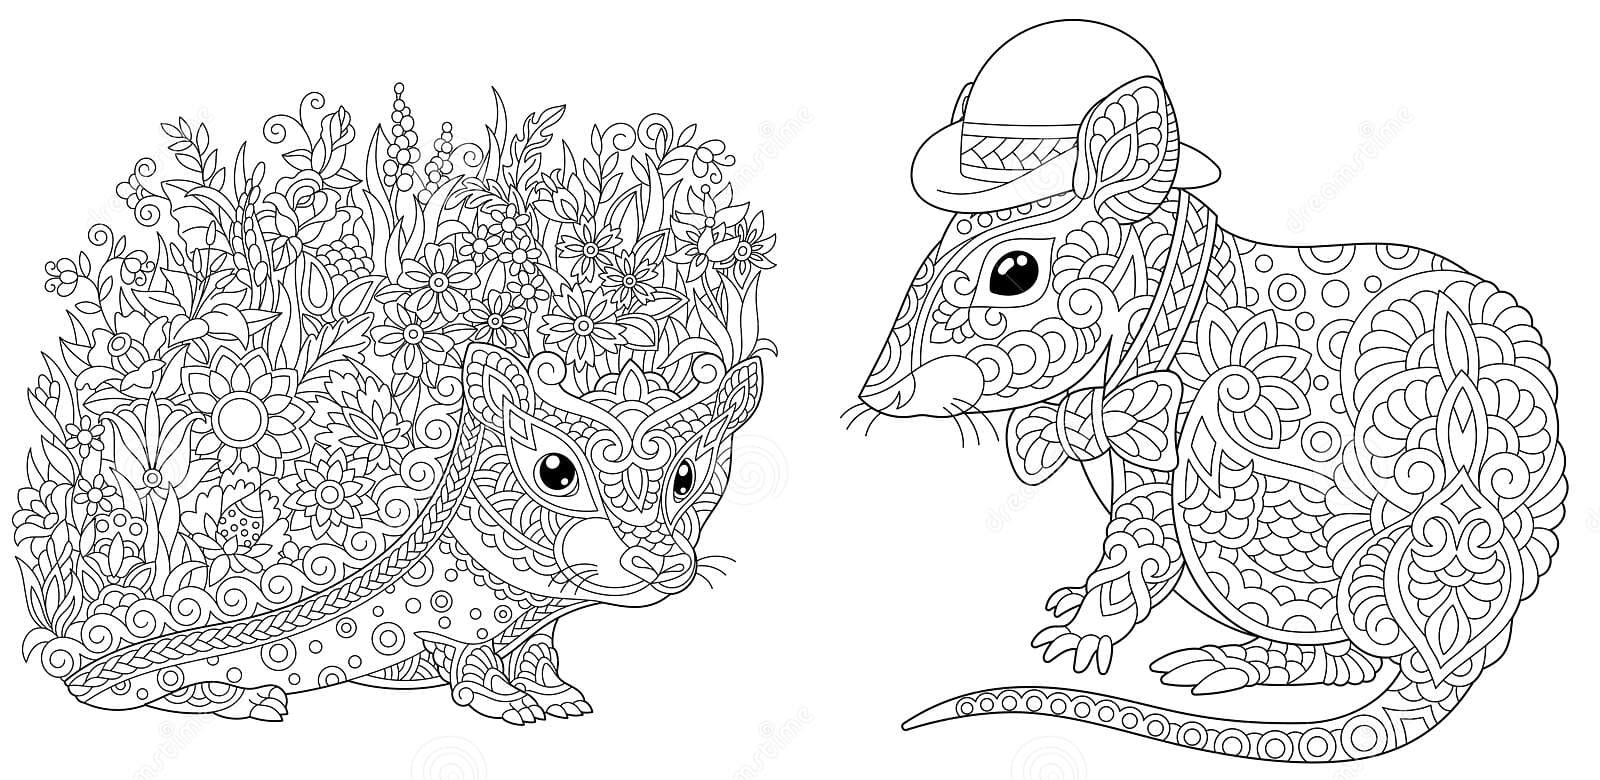 Coloring Pages With Hedgehog And Mouse Coloring Page